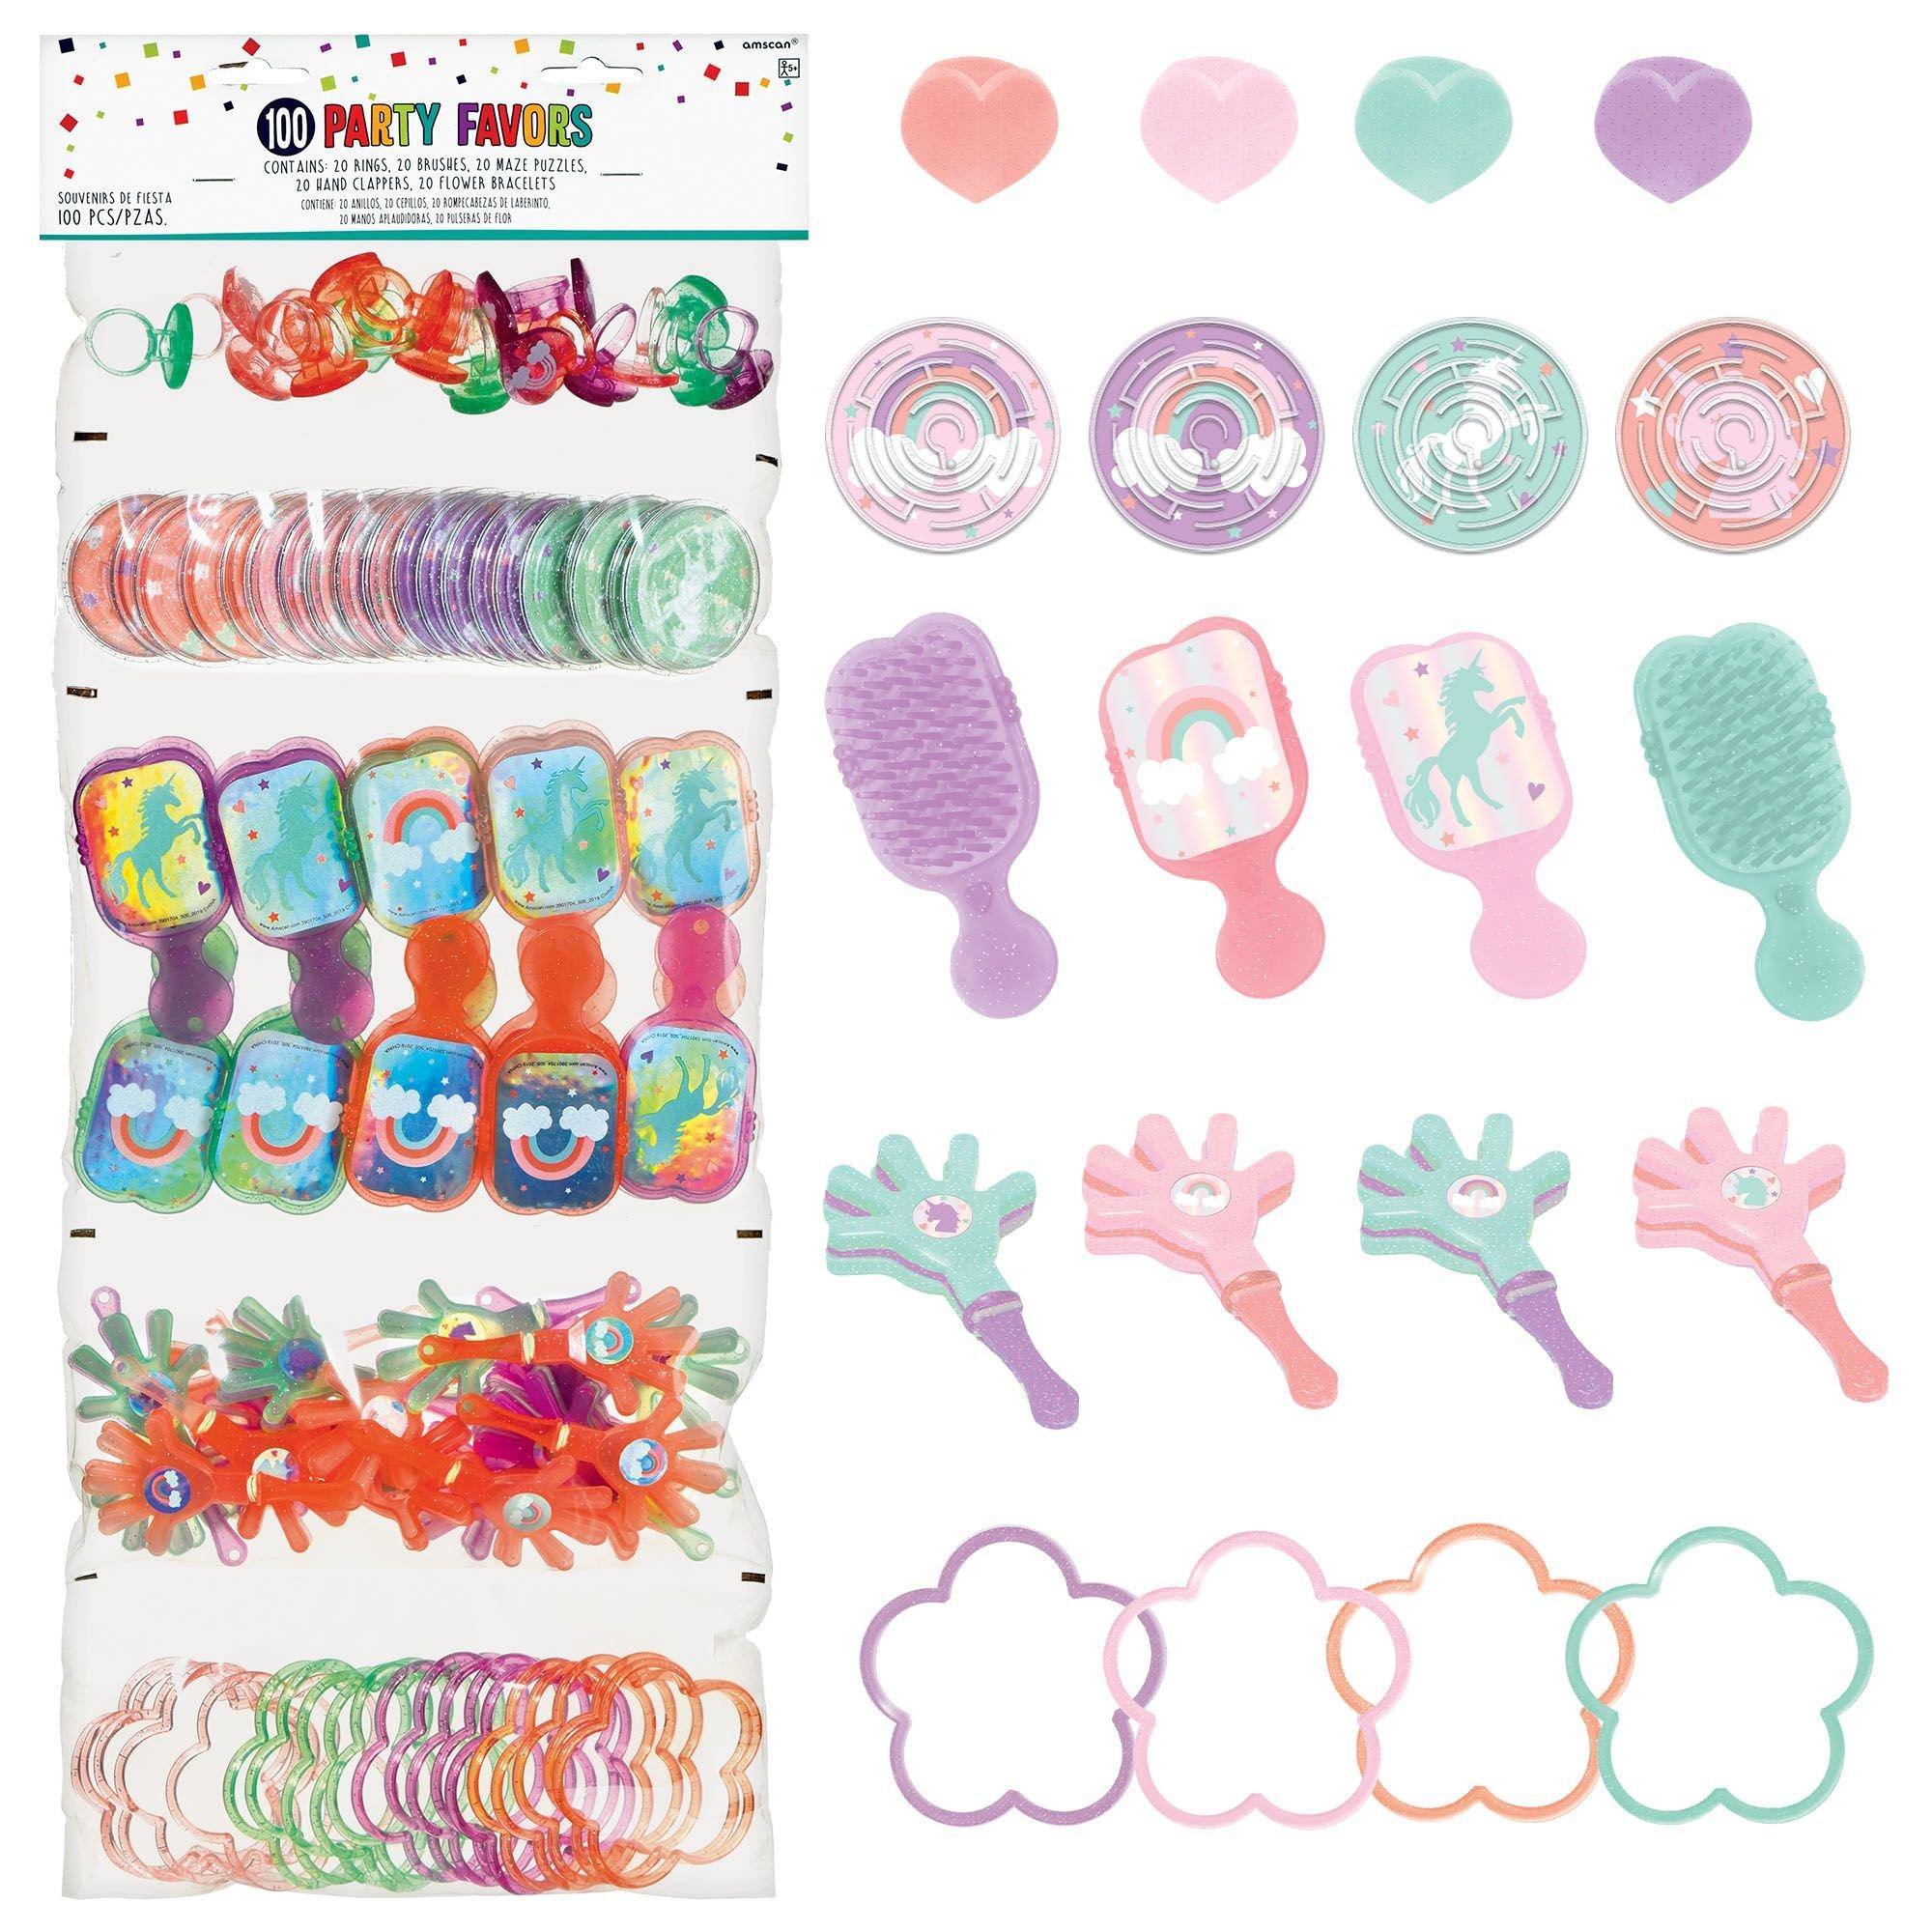 Americasfavors Unicorn Party Favors for Kids Bundle (12 of Each Item) Slime, Bags, Rings, Tattoo & Keychains